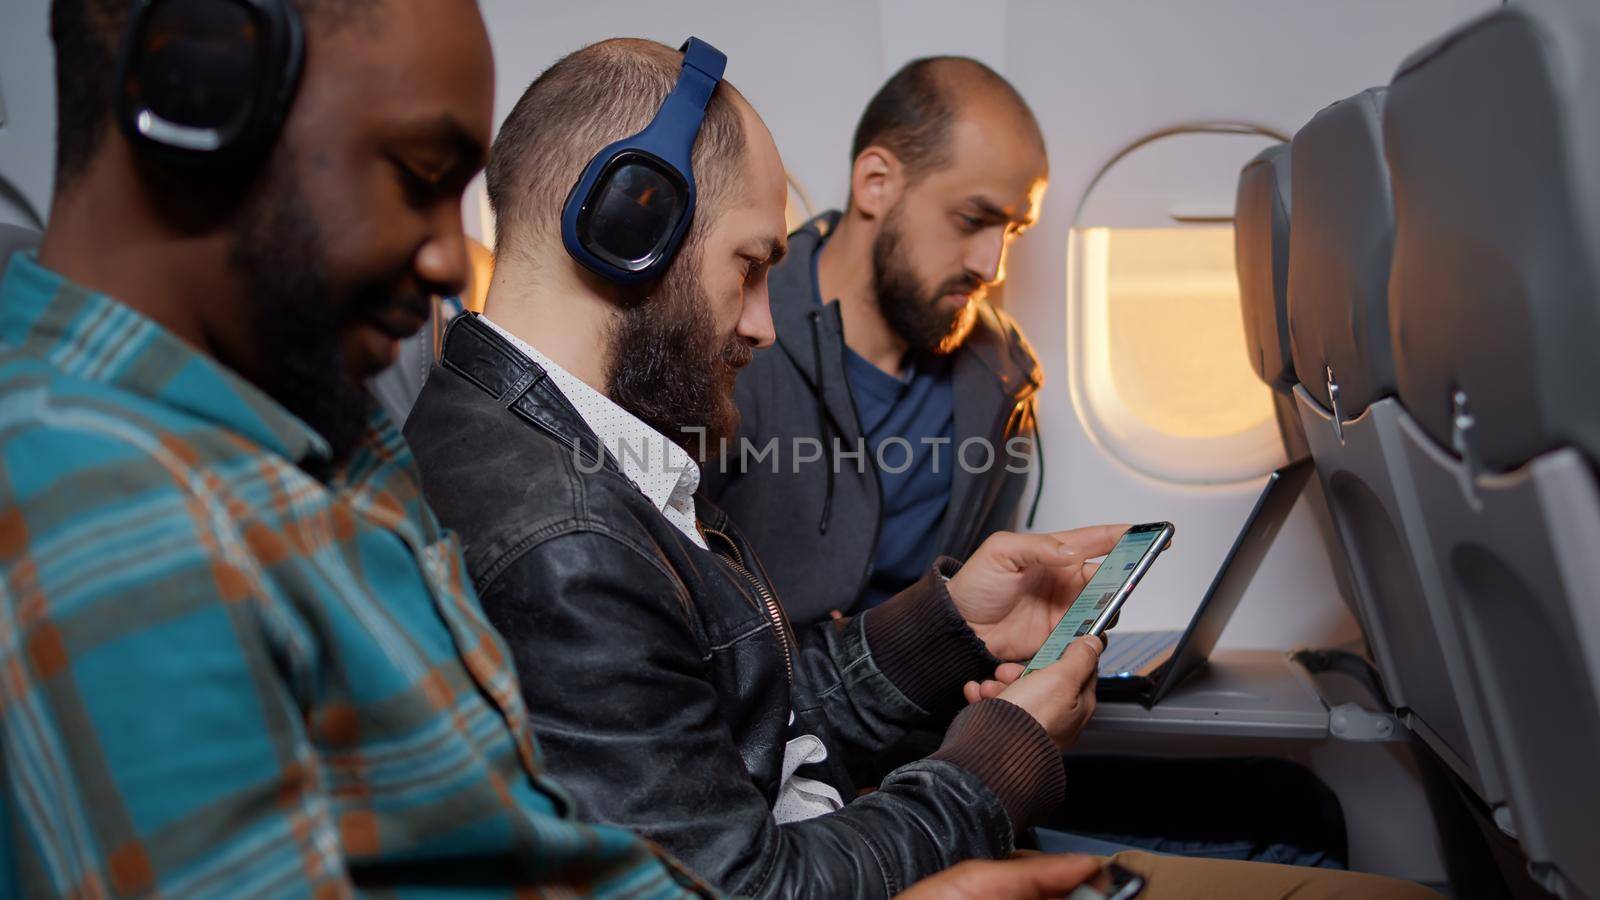 Freelancer using mobile phone during travel flight on plane, flying with international airline service. Travelling in economy class to go on holiday vacation, browsing website.